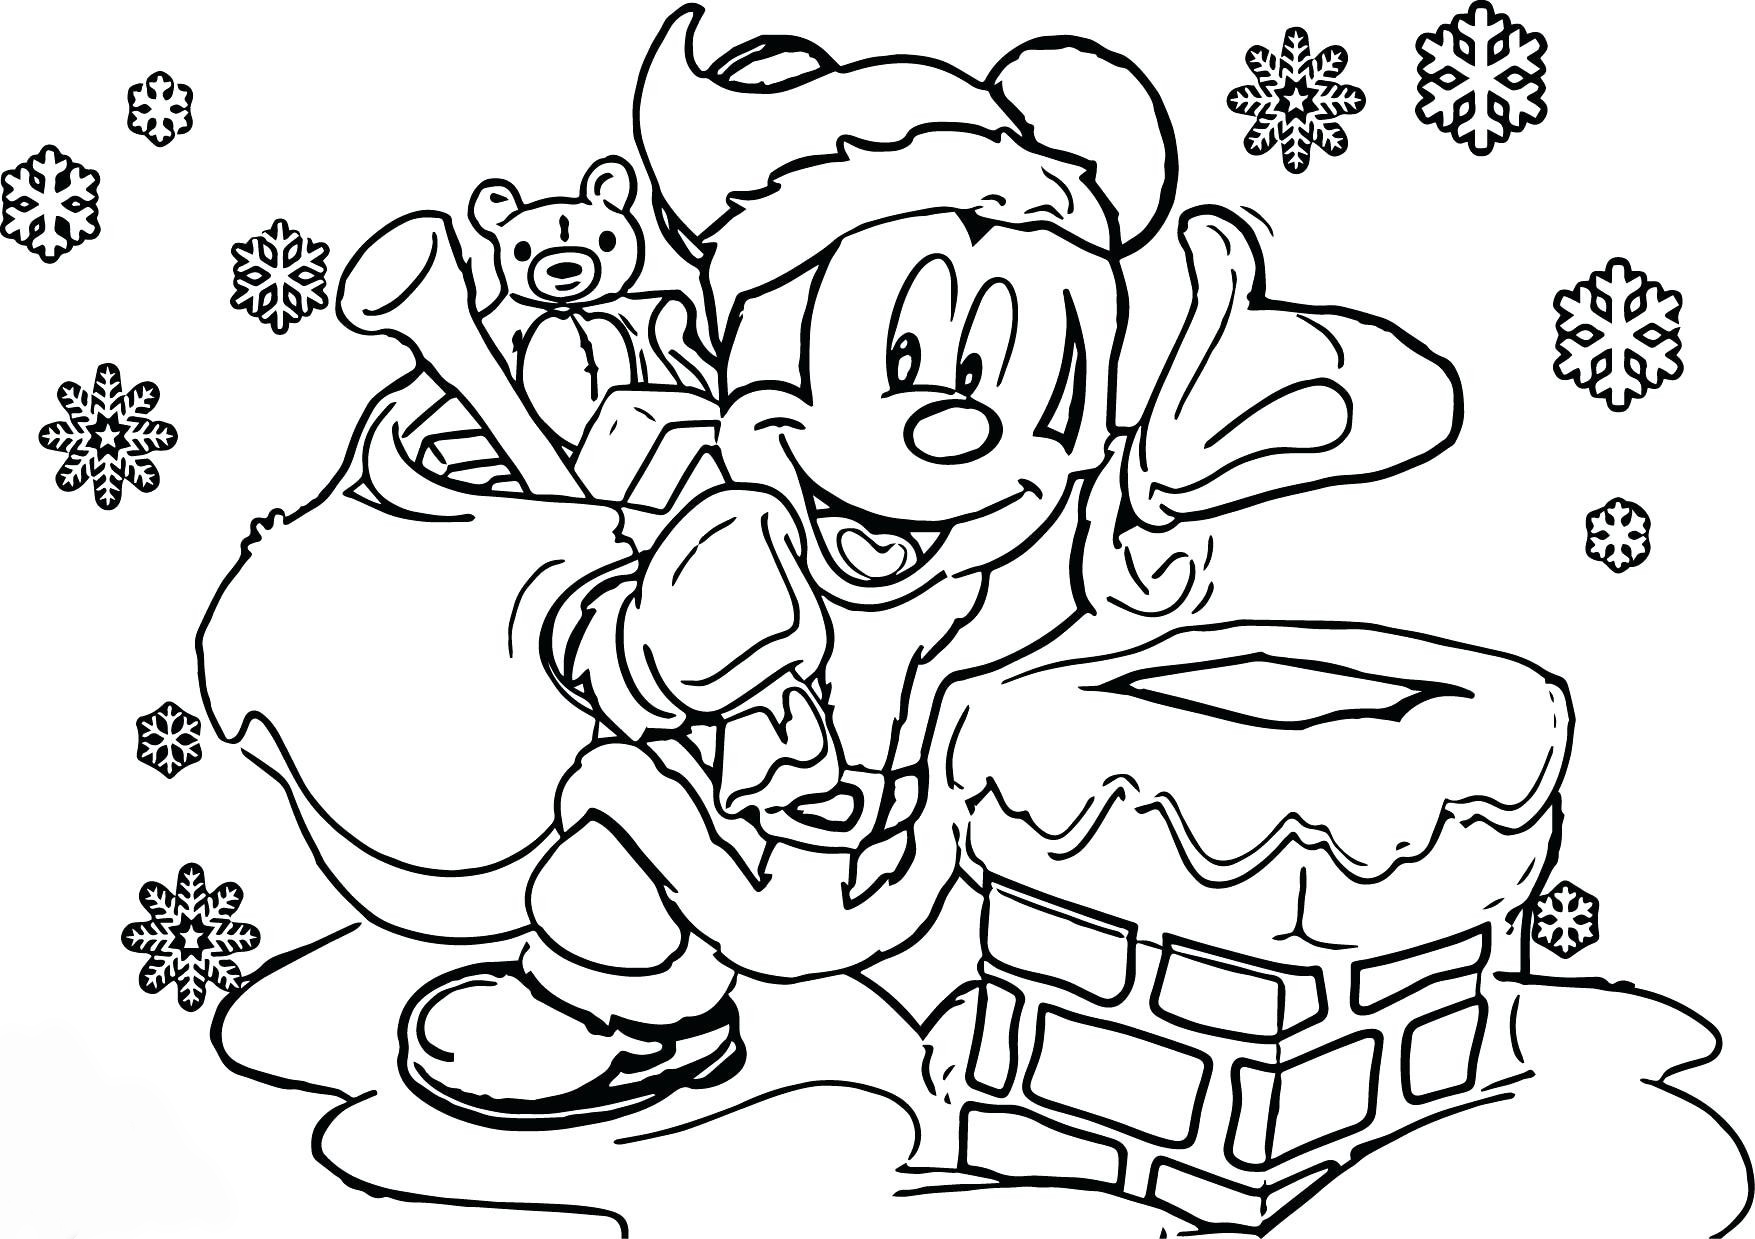 Mickey Mouse Christmas Coloring Pages - Best Coloring Pages For Kids